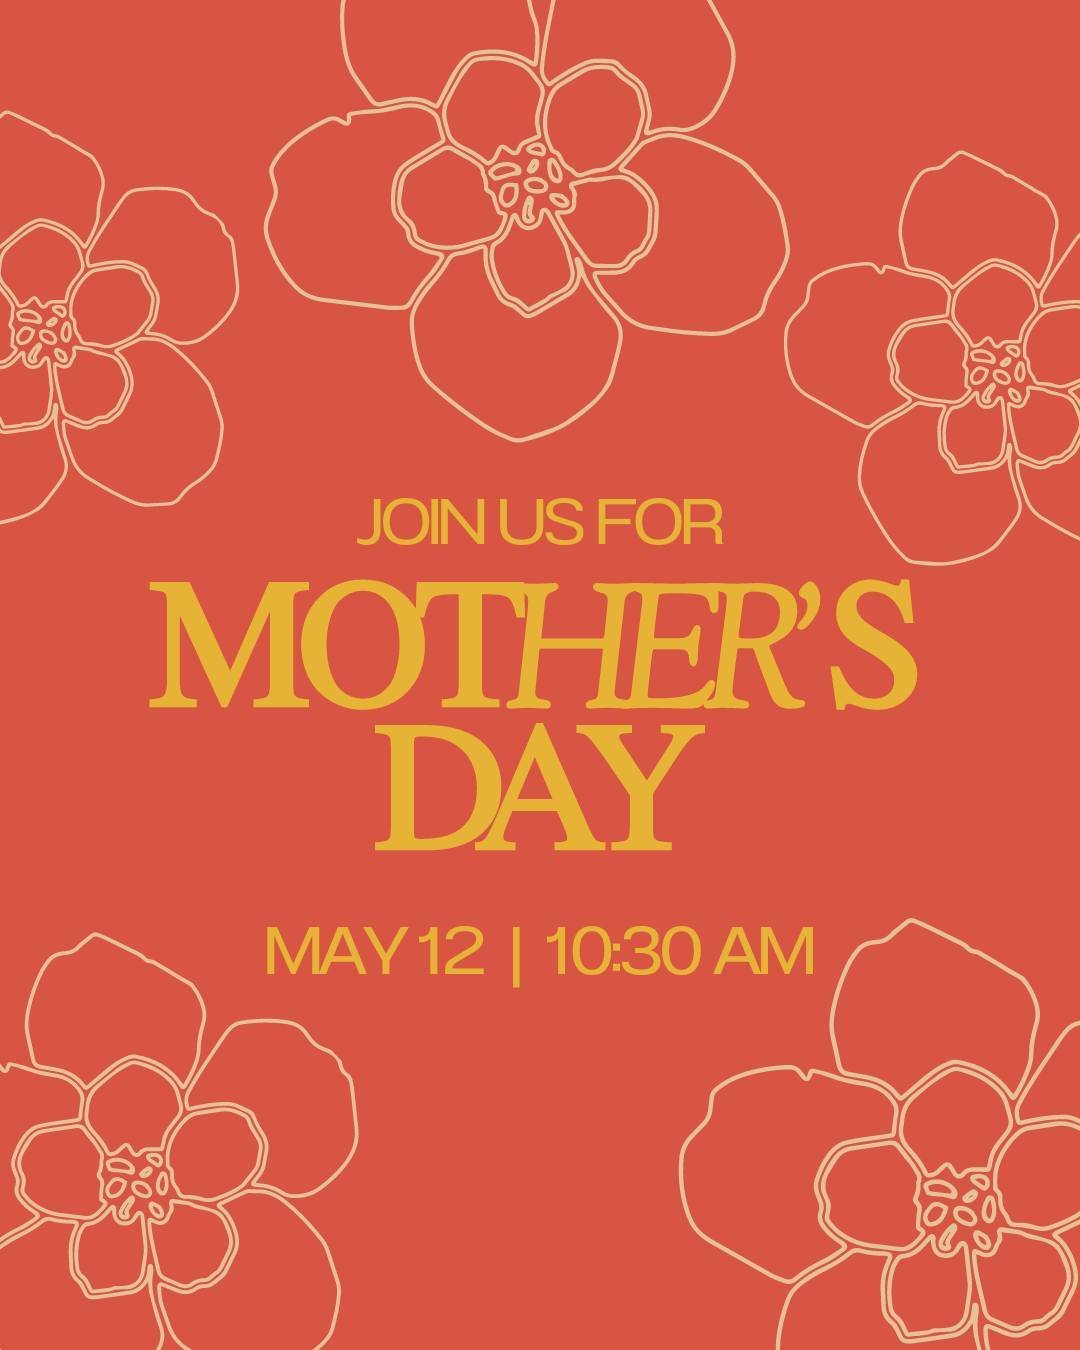 Whether you&rsquo;re a mother, spiritual mom, grandmother, or friend, we want to celebrate you this Mother&rsquo;s Day! Join us on Sunday, May 12 at 10:30 AM for service, worship, a special gift just for you, and photo booths! ⁠
⁠
#mothersday #loveda